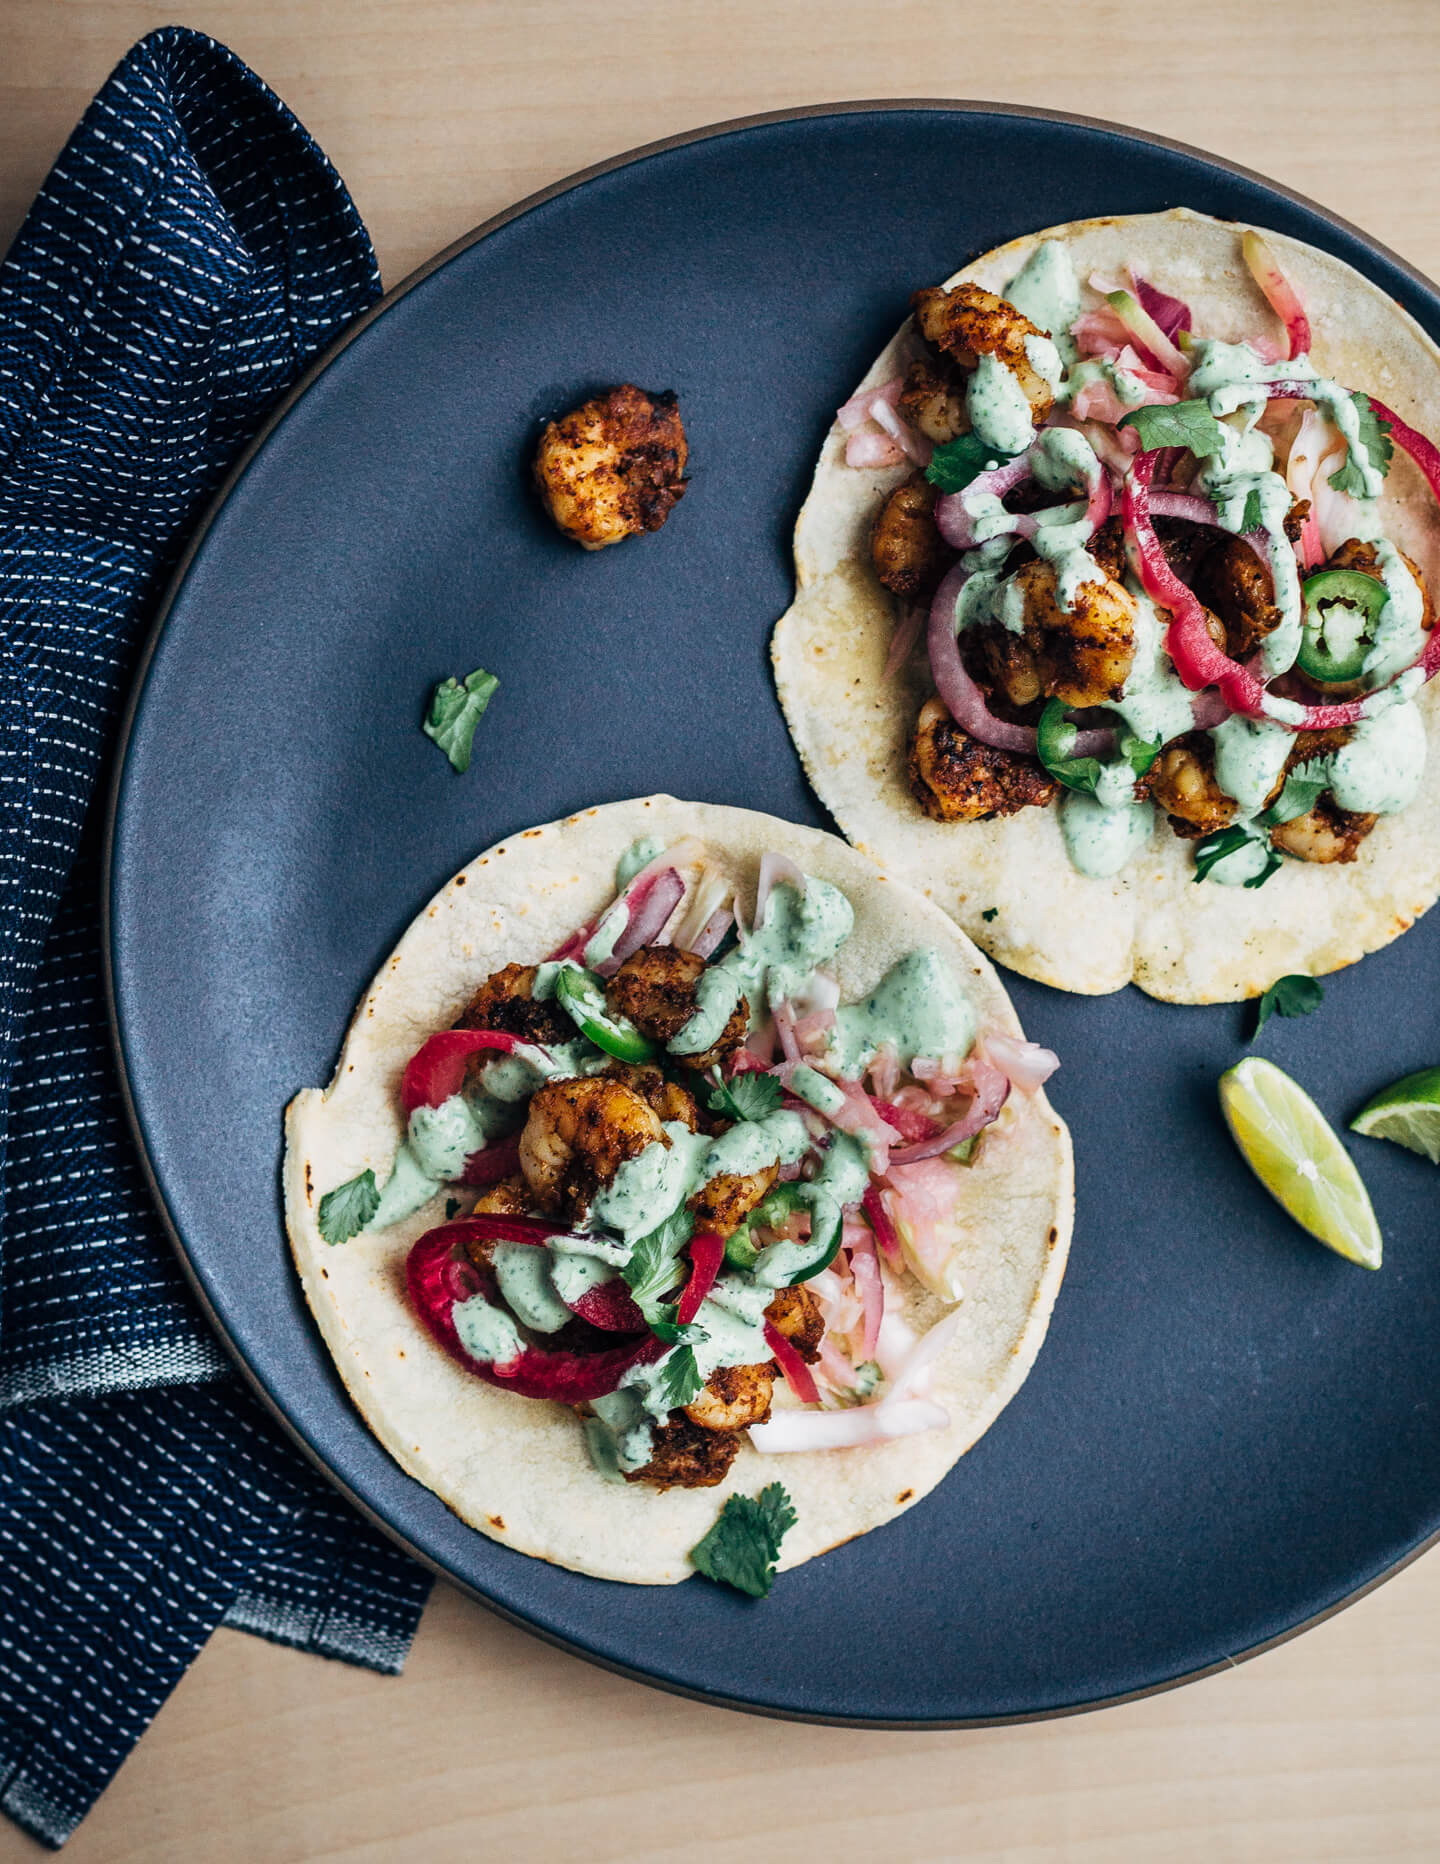 These easy (and delicious!) shrimp tacos feature pan-seared shrimp tossed with lots of chili, cumin, and garlic powder, a simple winter slaw made with watermelon radishes and jicama, and a quick cilantro-yogurt blender sauce. 